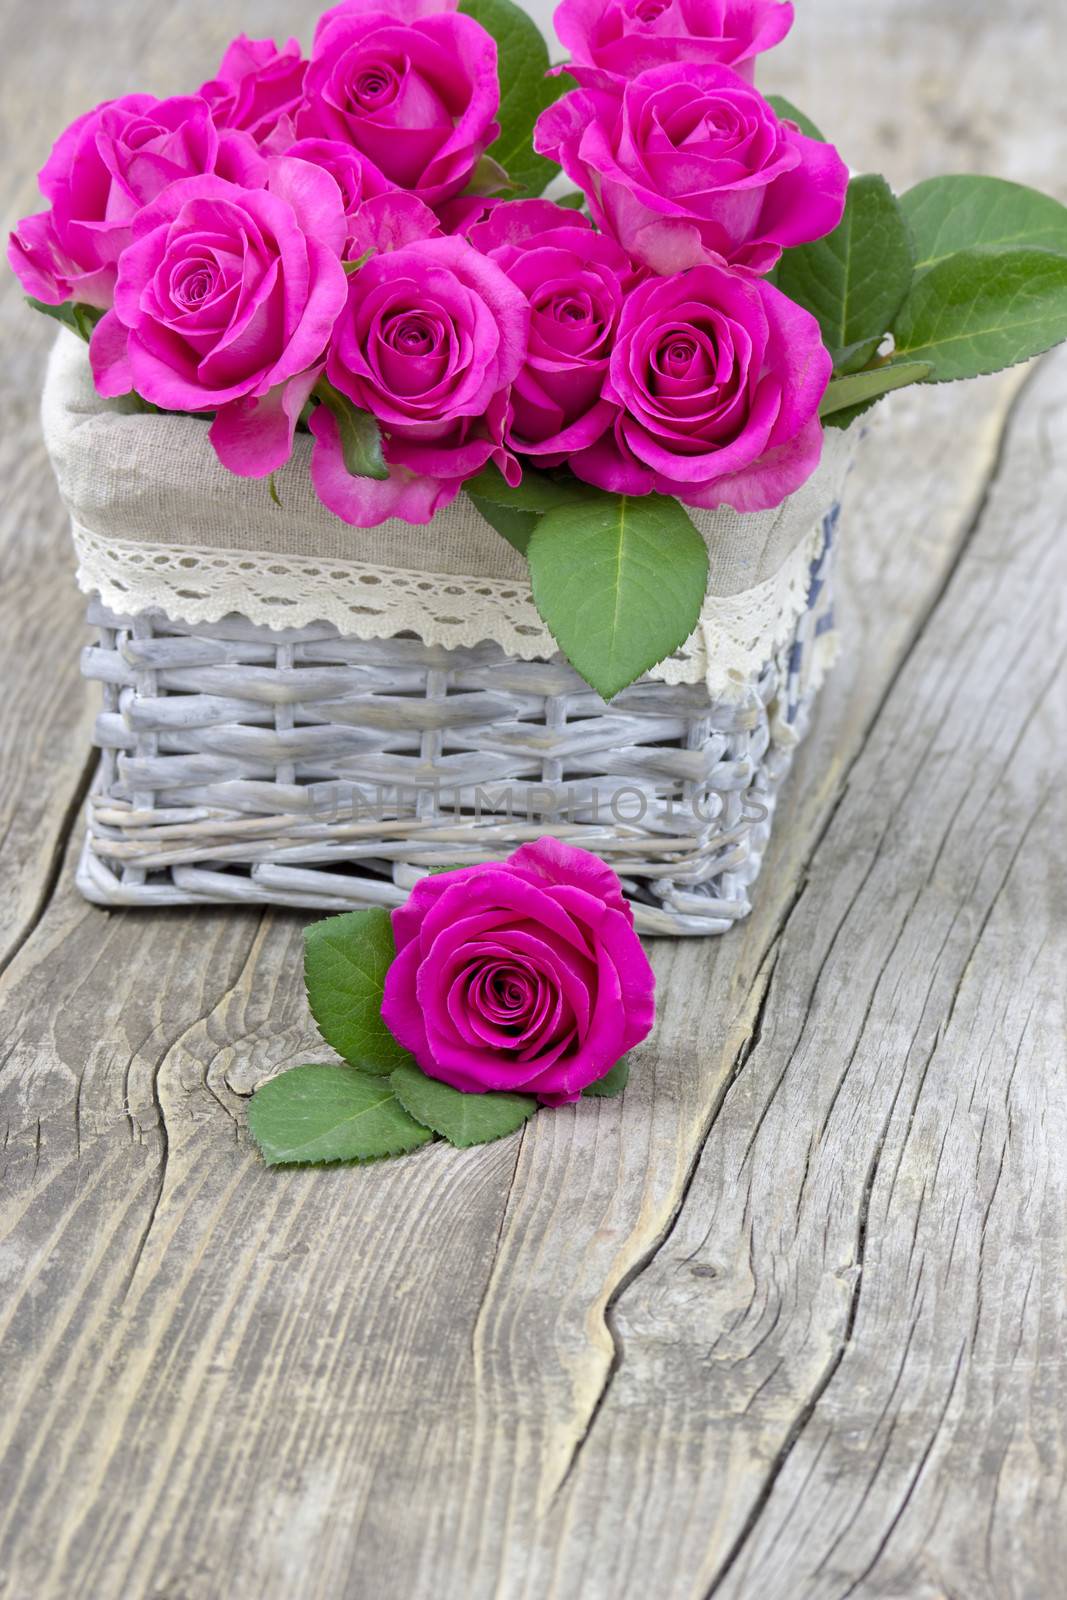 pink roses in a basket